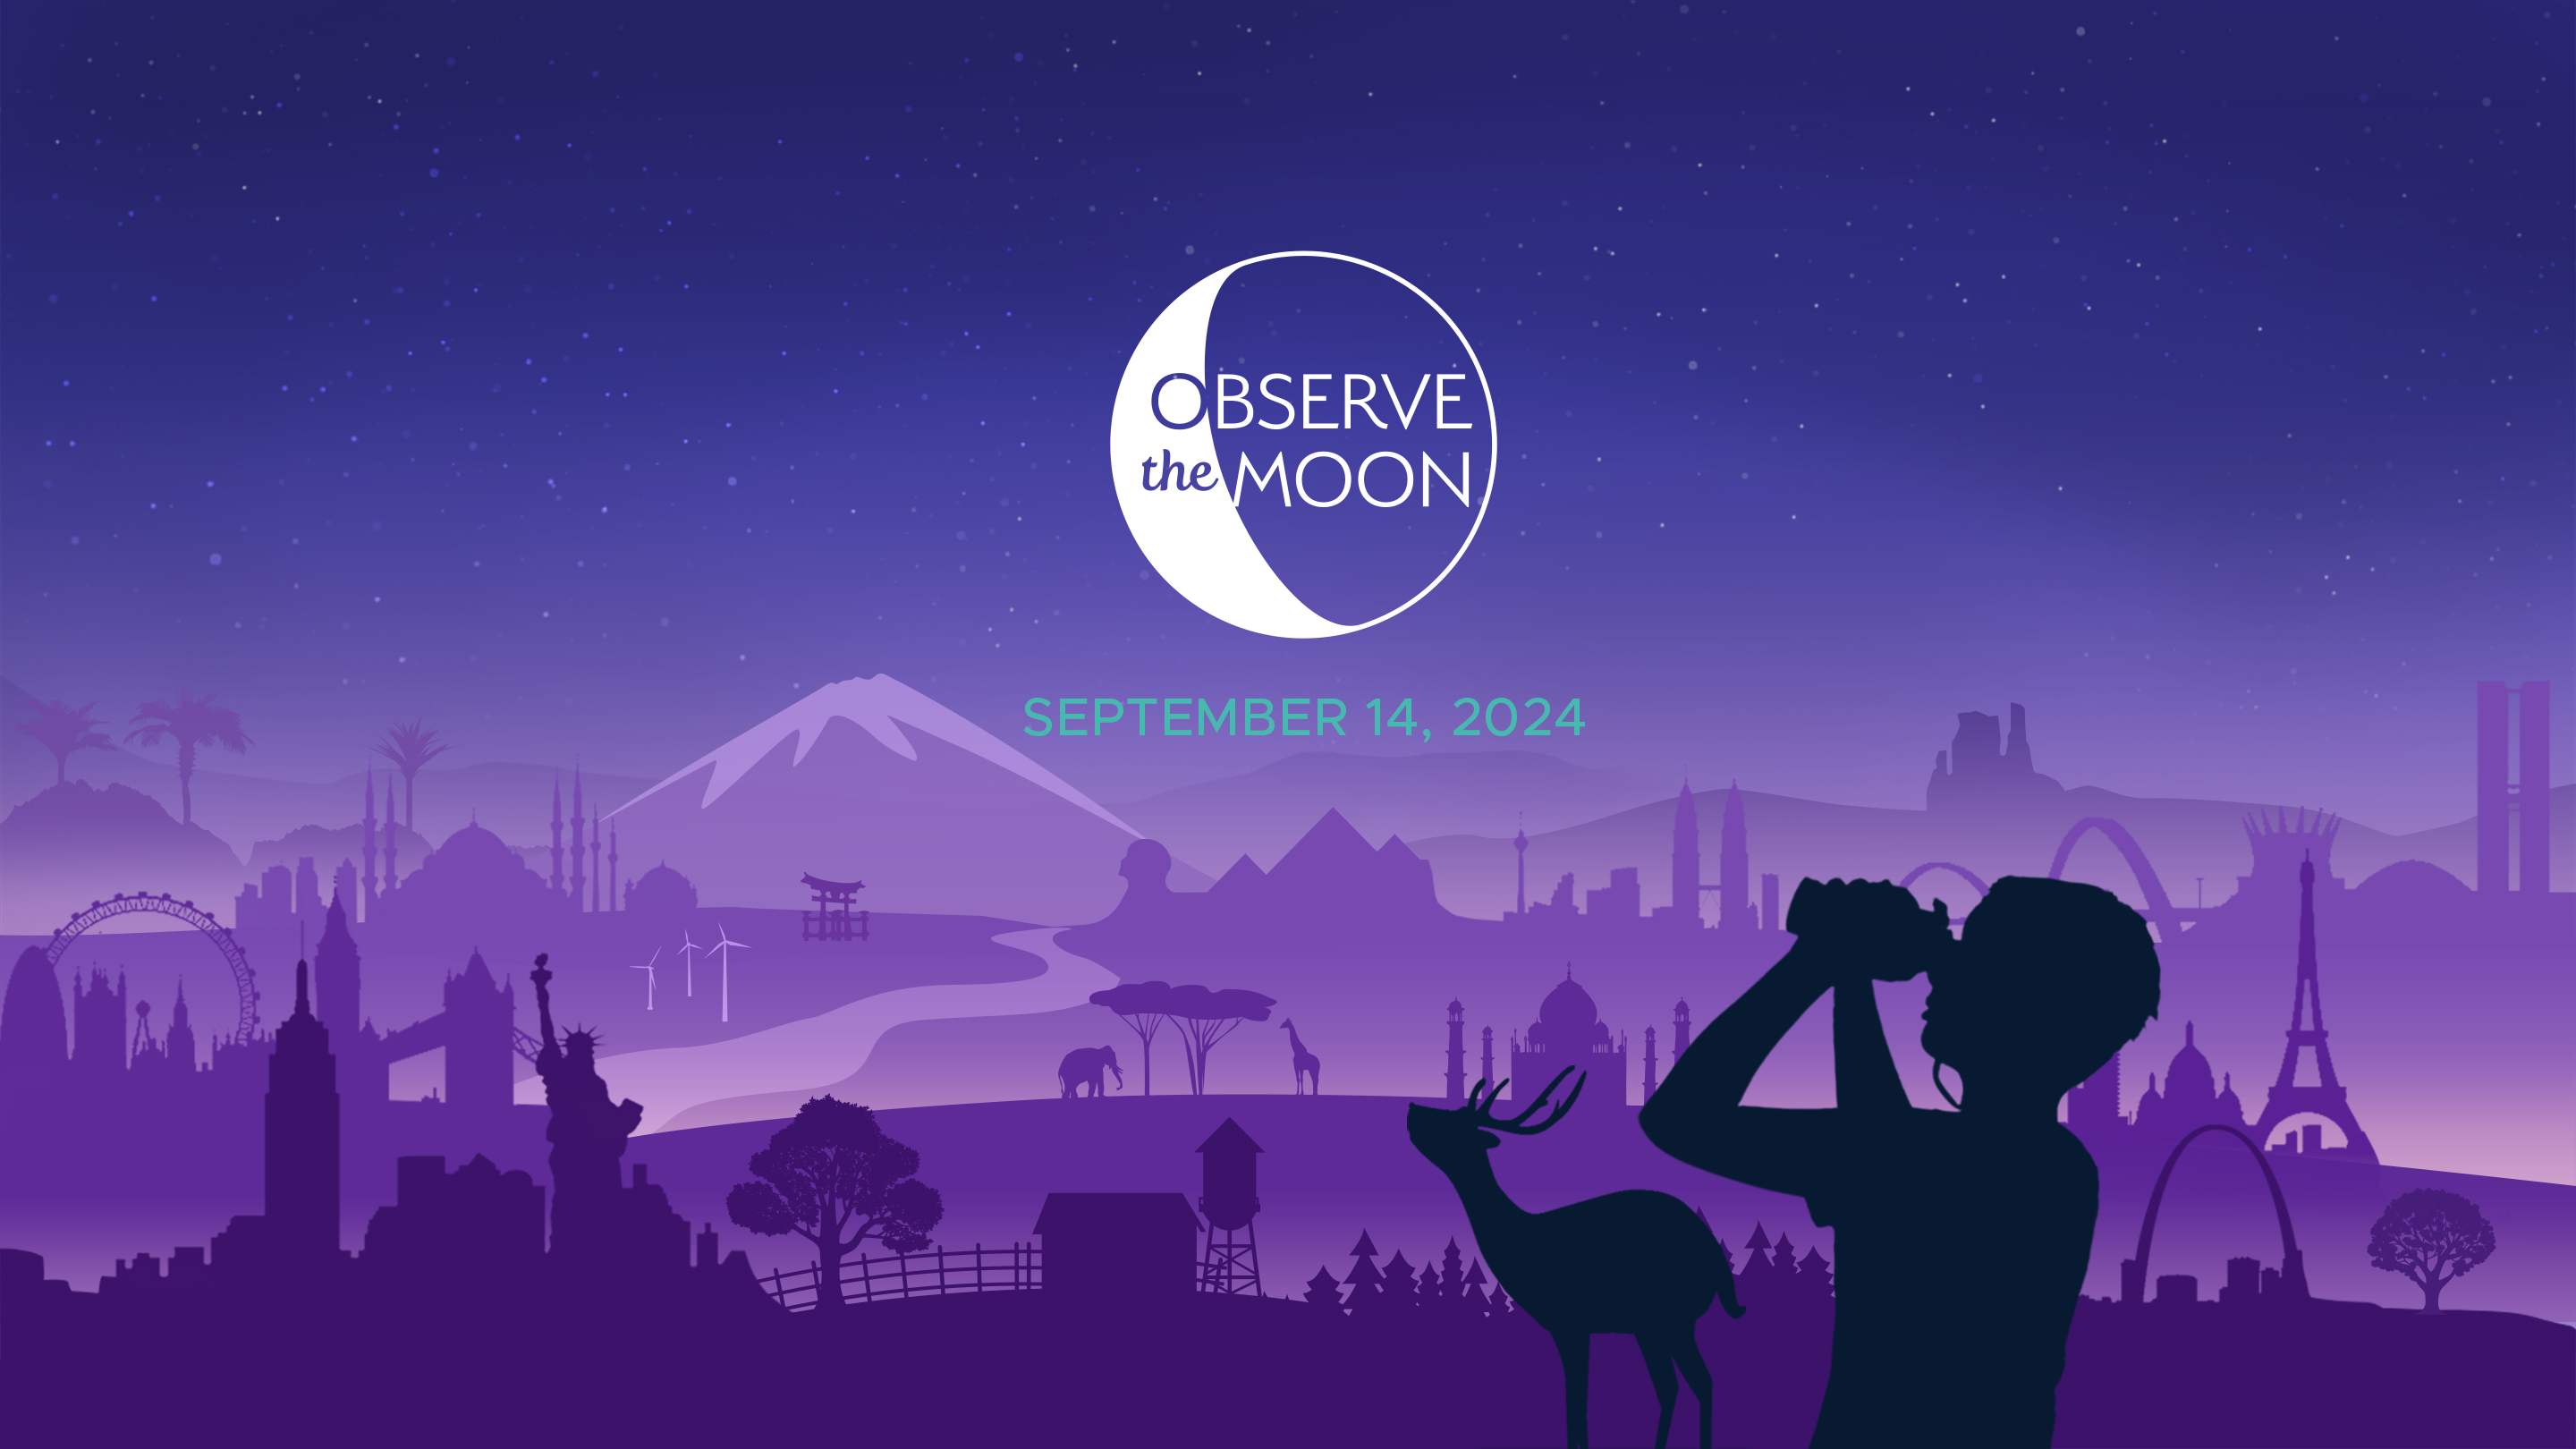 slide 1 - Illustration of imagined landscape with world landmarks, silhouette of a boy looking up at a graphical logo representing the Moon, with the title "Observe the Moon". Subtitle text reads, "September 14, 2024"